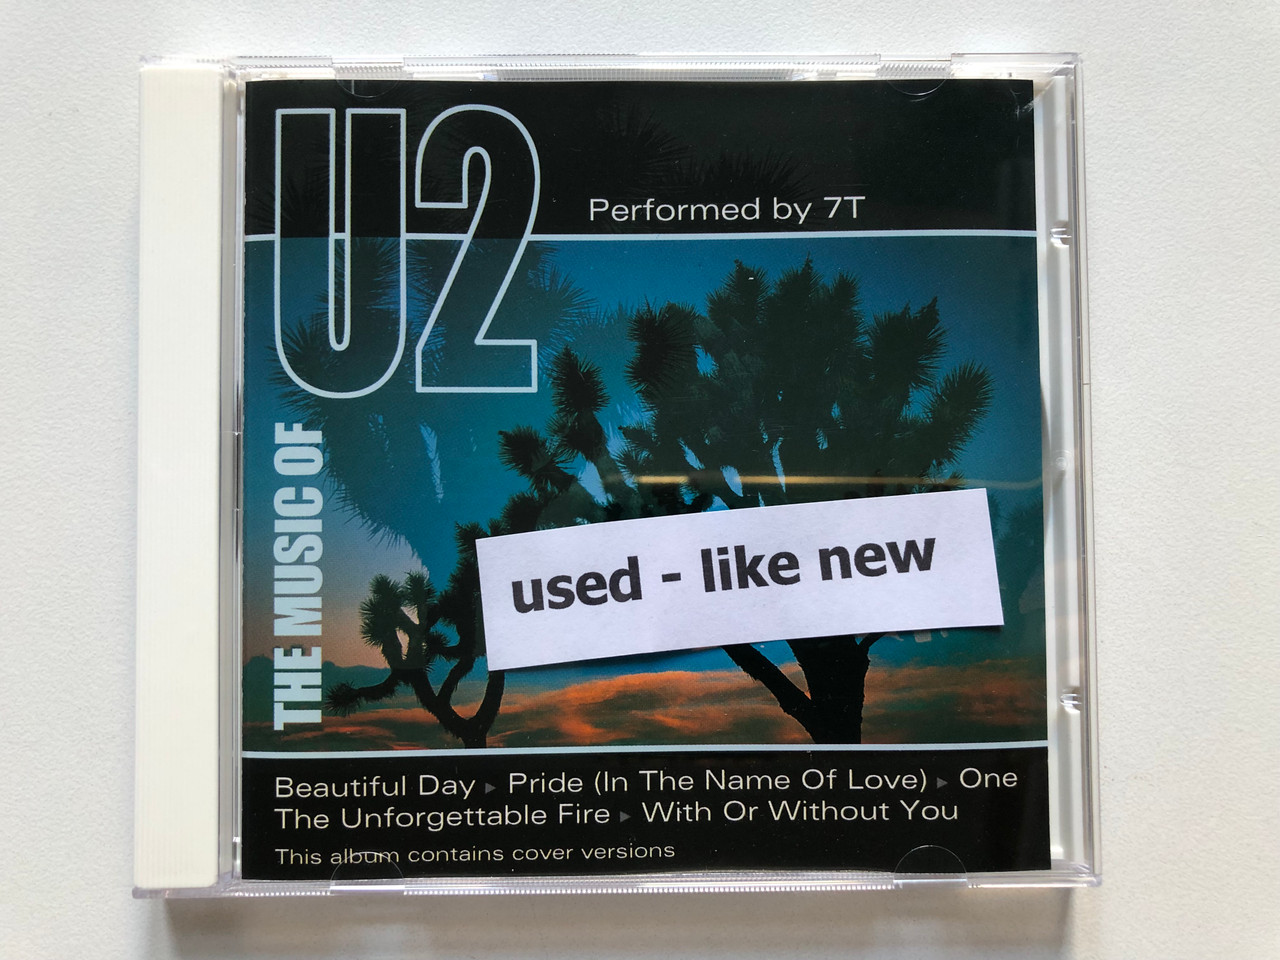 https://cdn10.bigcommerce.com/s-62bdpkt7pb/products/0/images/307513/The_Music_Of_U2_-_Performed_By_7T_Beautiful_Day_Pride_In_The_Name_Of_Love_One_The_Unforgettable_Fire_With_Or_Without_You_This_album_contains_cover_versions_Millennium_Gold_Audio_CD_4__82092.1698730977.1280.1280.JPG?c=2